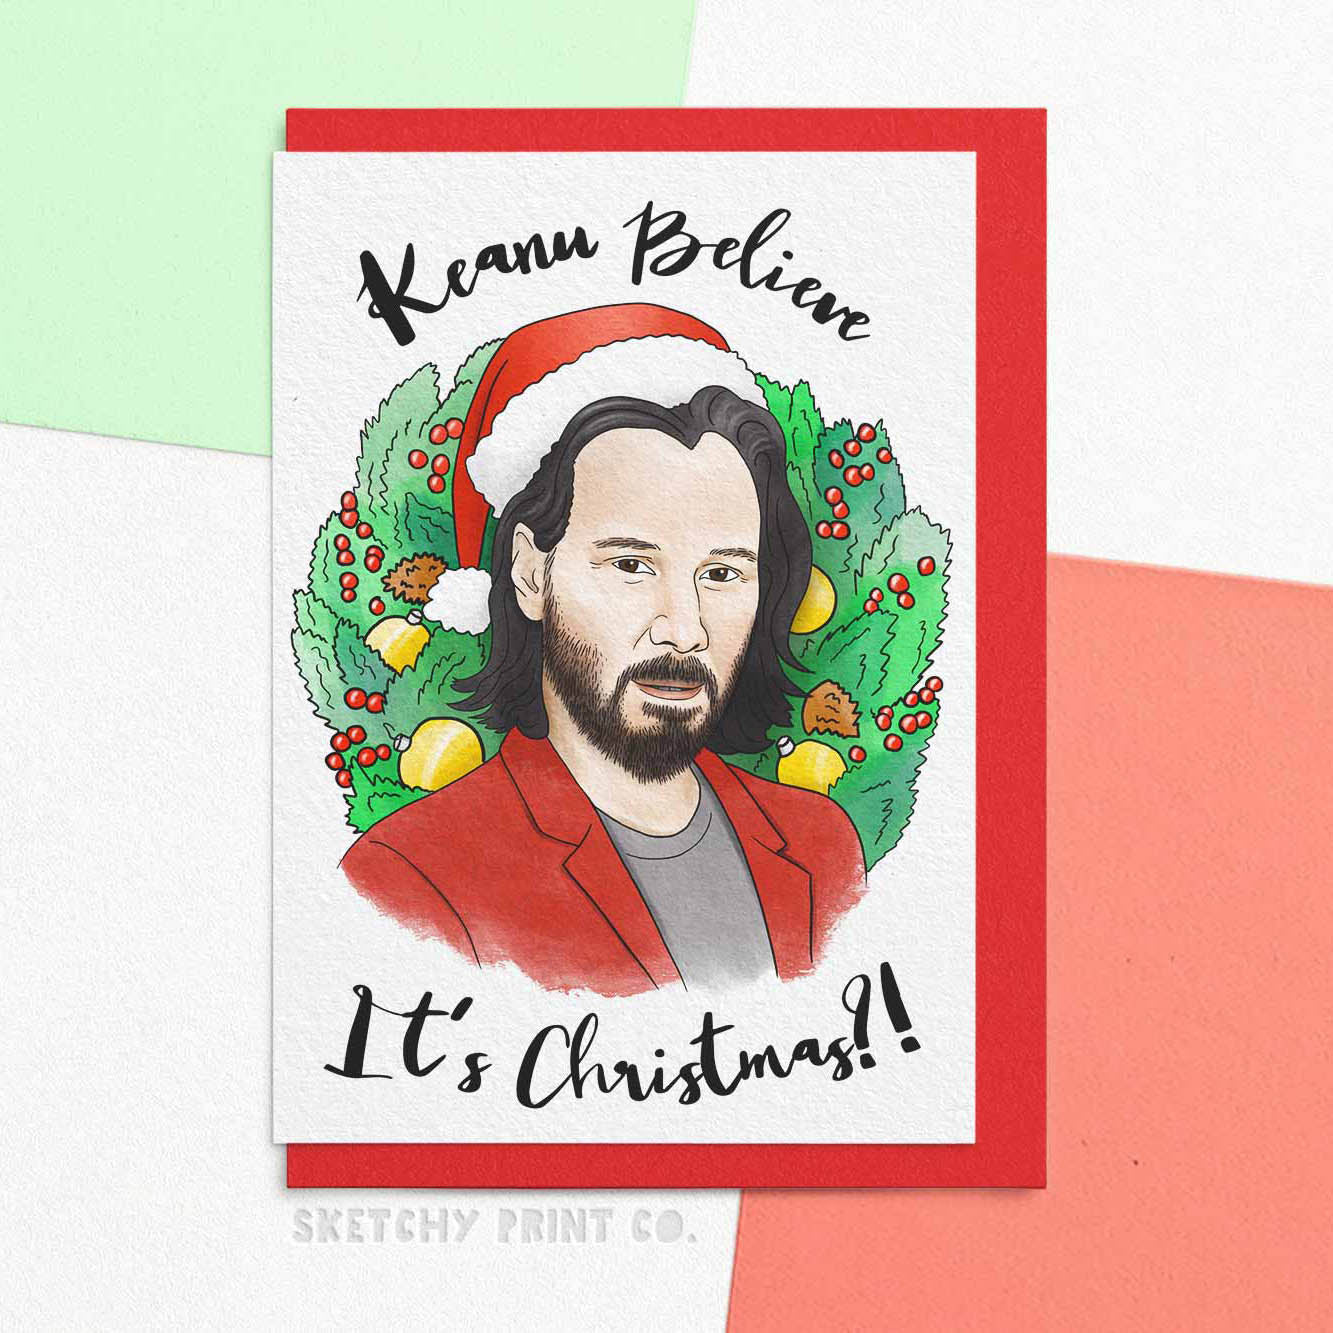 Keanu Funny Christmas Cards boyfriend girlfriend unique gift unusual hilarious illustrated sketchy print co